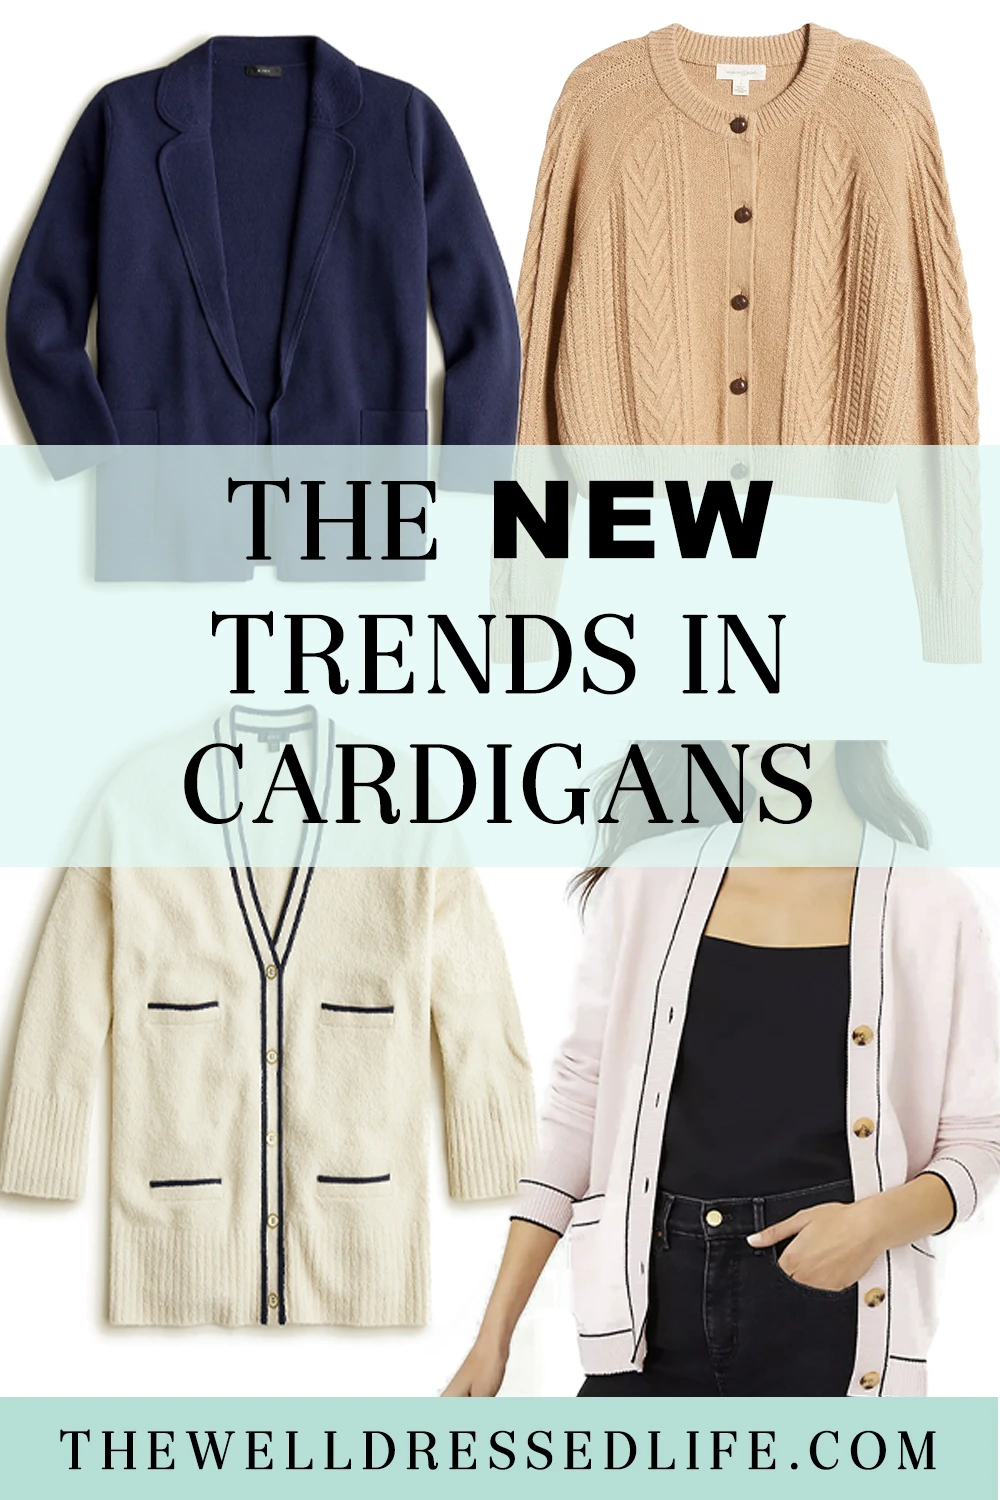 The New Trends in Cardigans